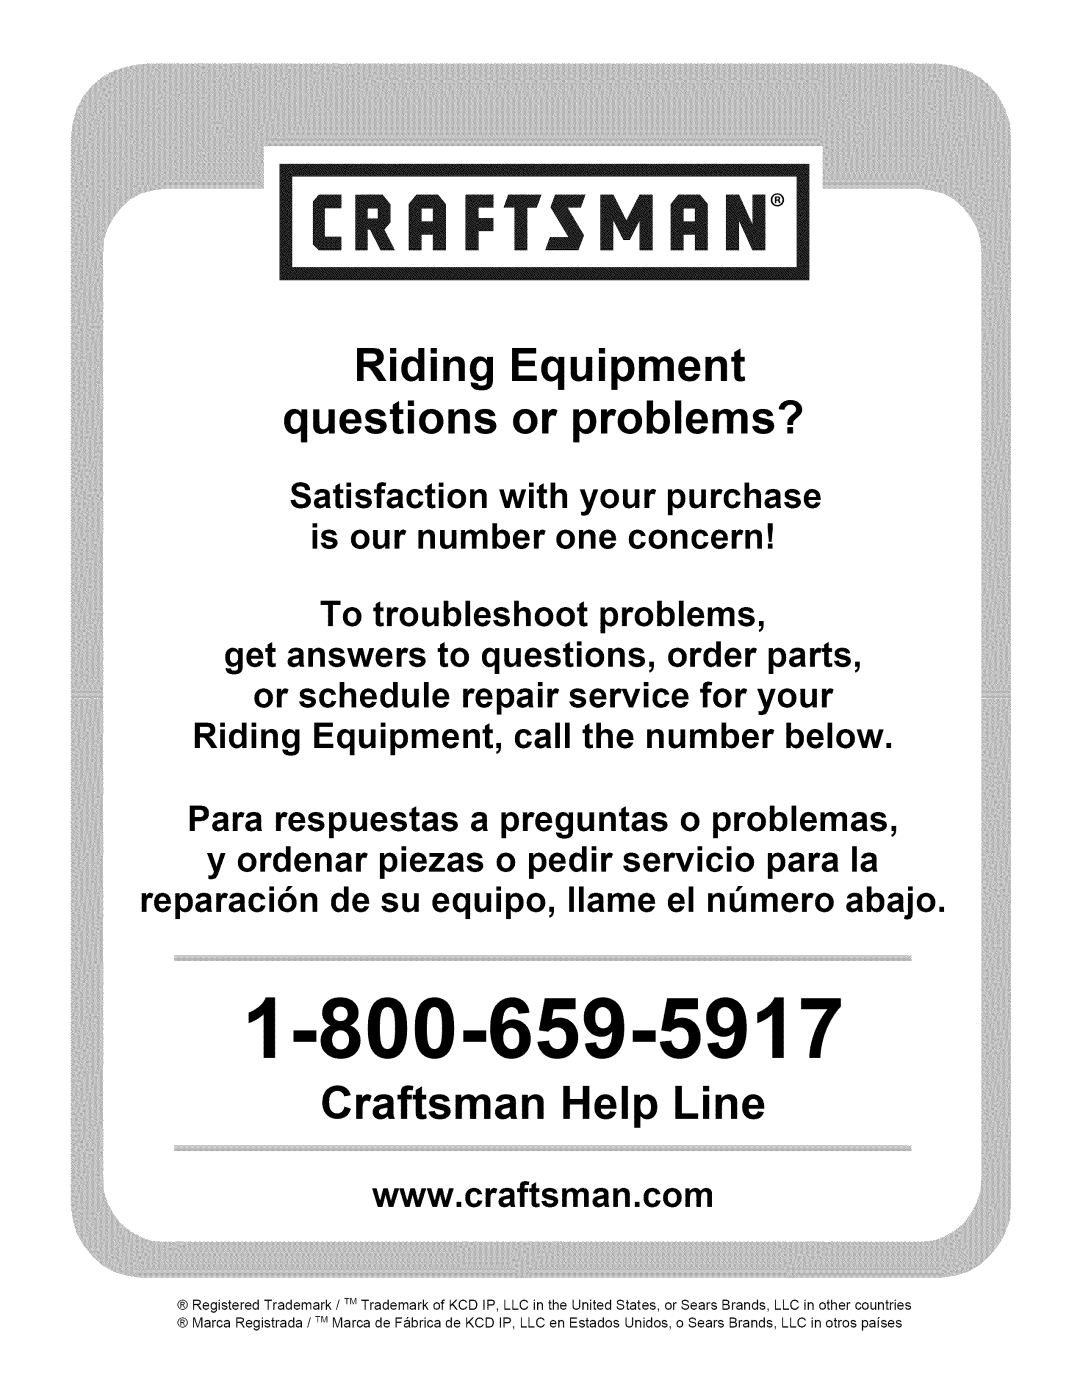 Craftsman PYT 9000, 247.28672 manual 1-800-659-5917, Riding Equipment questions or problems?, Craftsman Help Line 